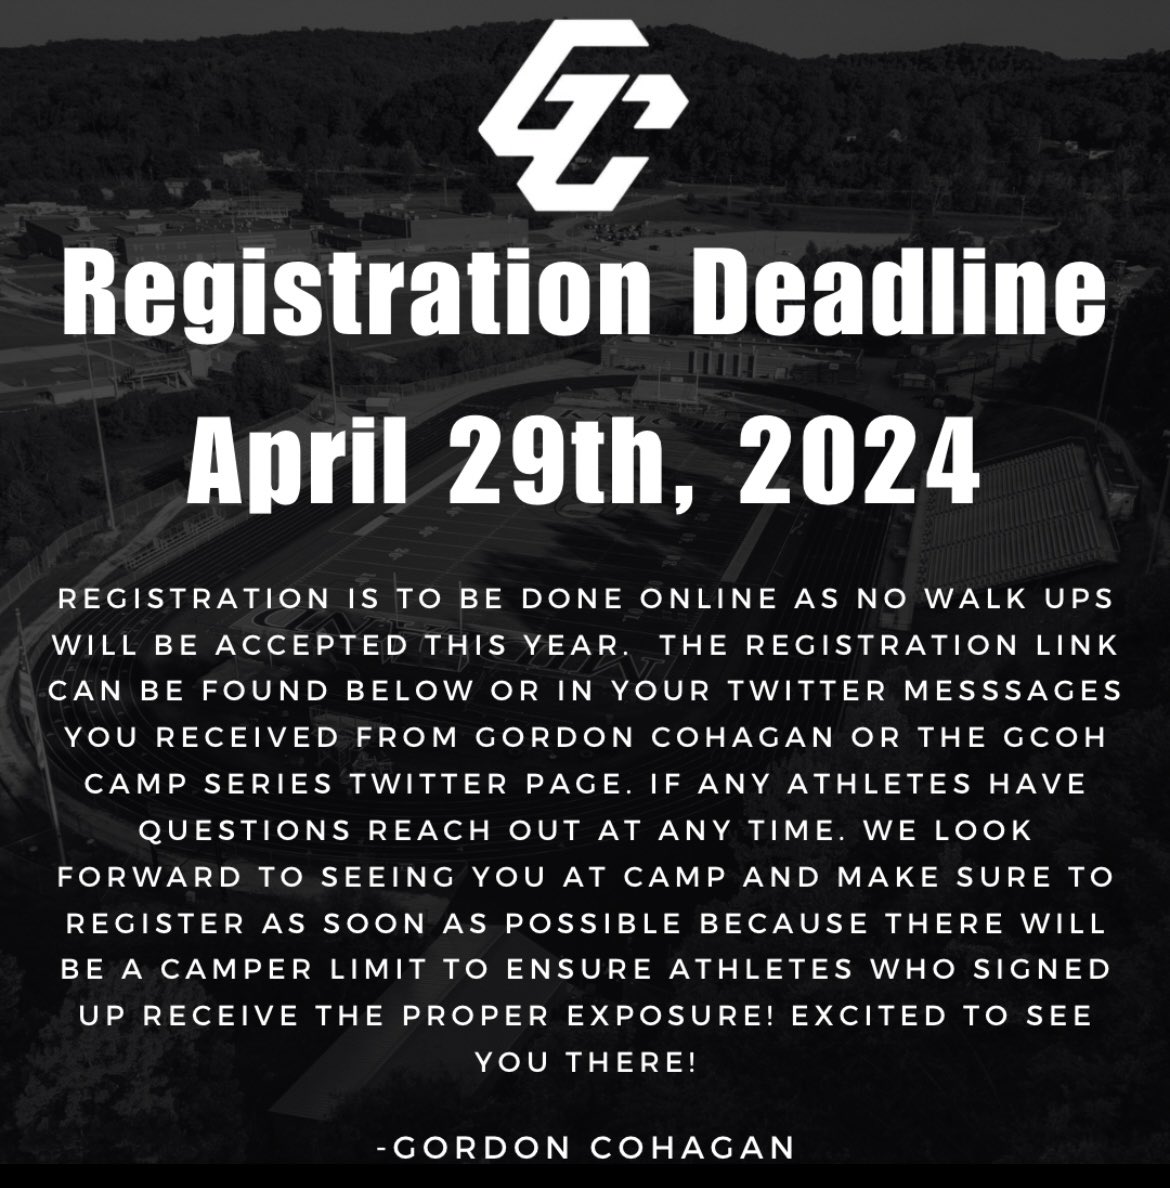 Athletes‼️ you have less than 6 weeks to get registered for camp🚨 April 29th is the online registration deadline! Follow the link below to get registered! Colleges are confirming daily to be in attendance! Come earn your exposure💯 gcohperformance.net/event-details-… @BallHawkMedia1